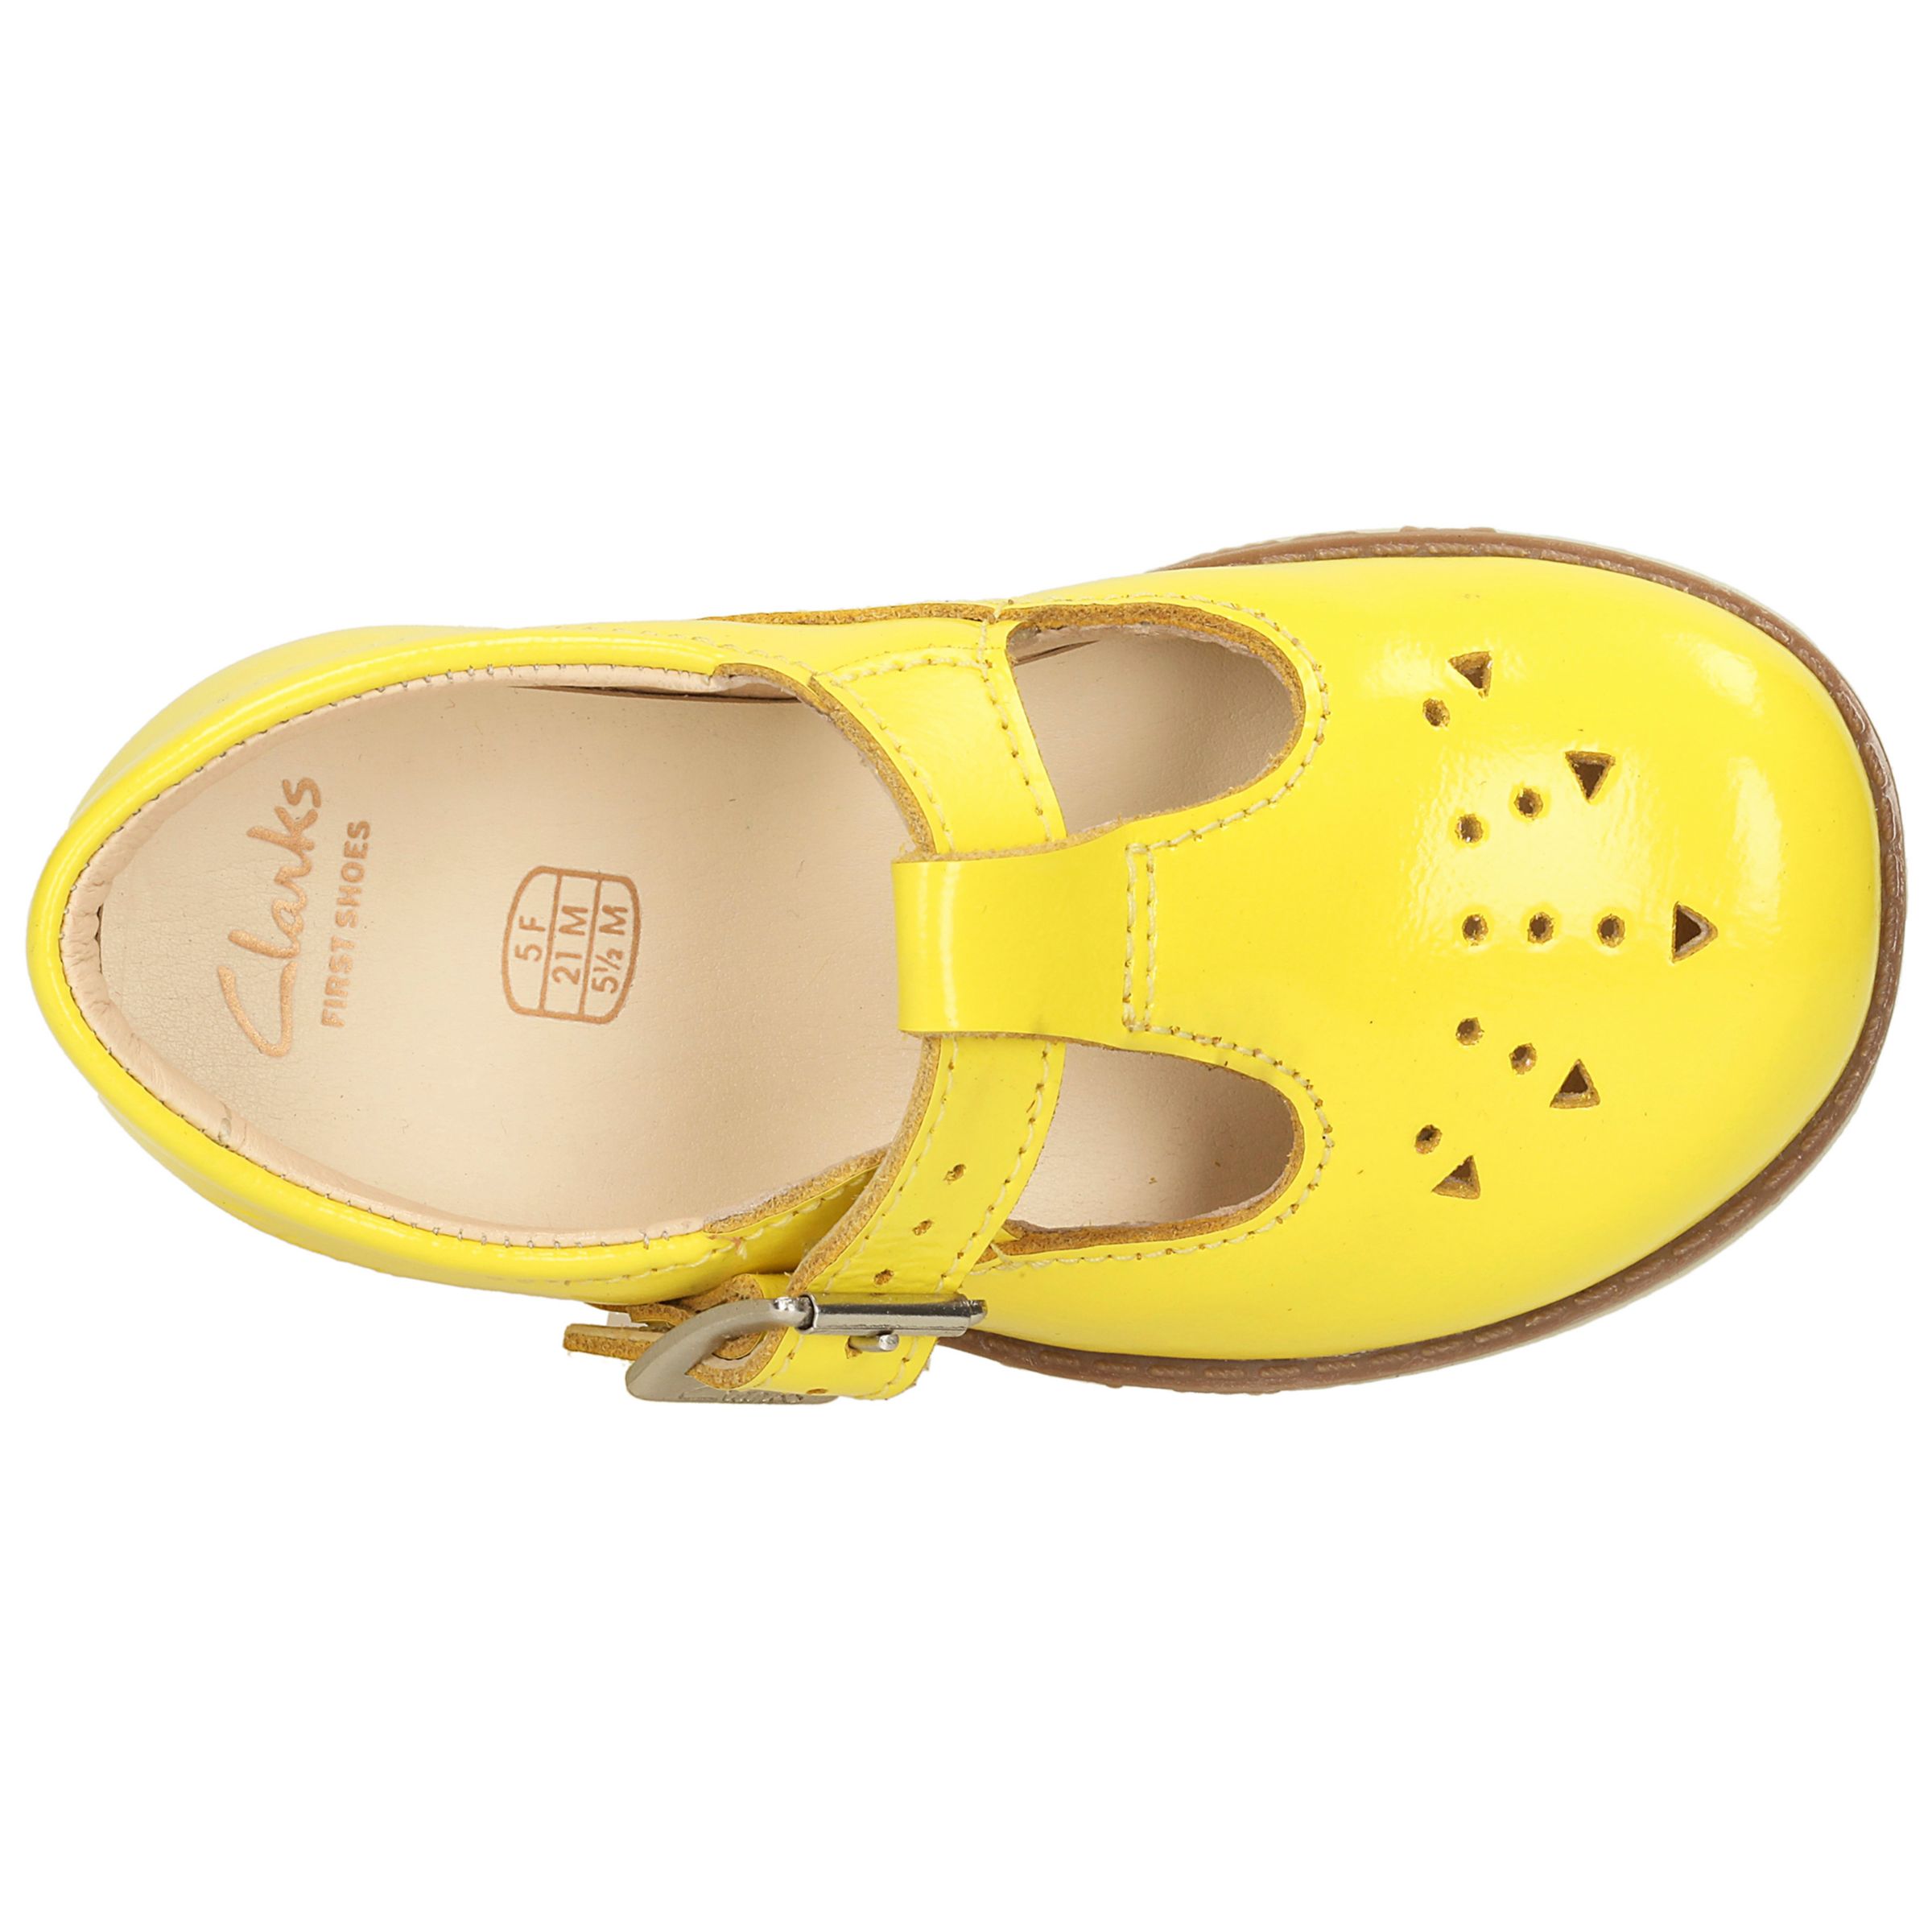 clarks yellow baby shoes